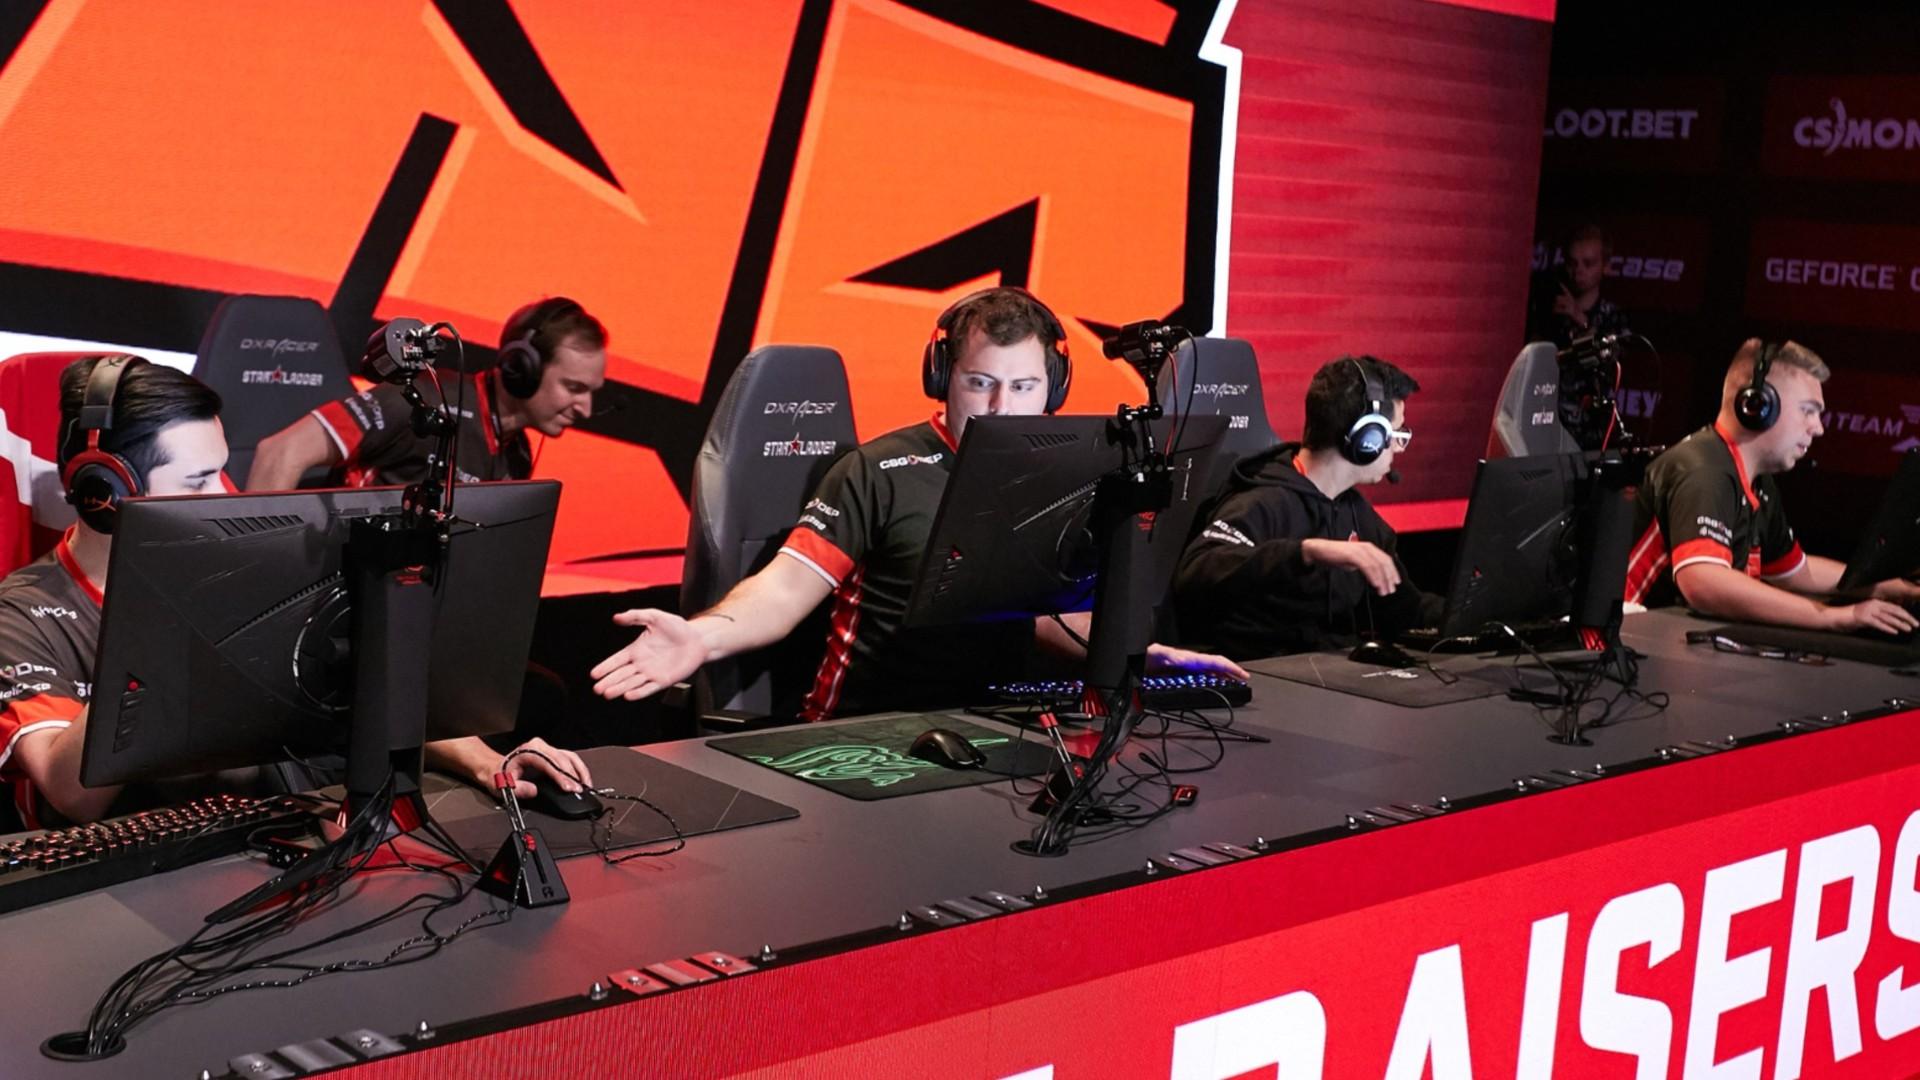 ANGE1 competing in CSGO StarLadder event.